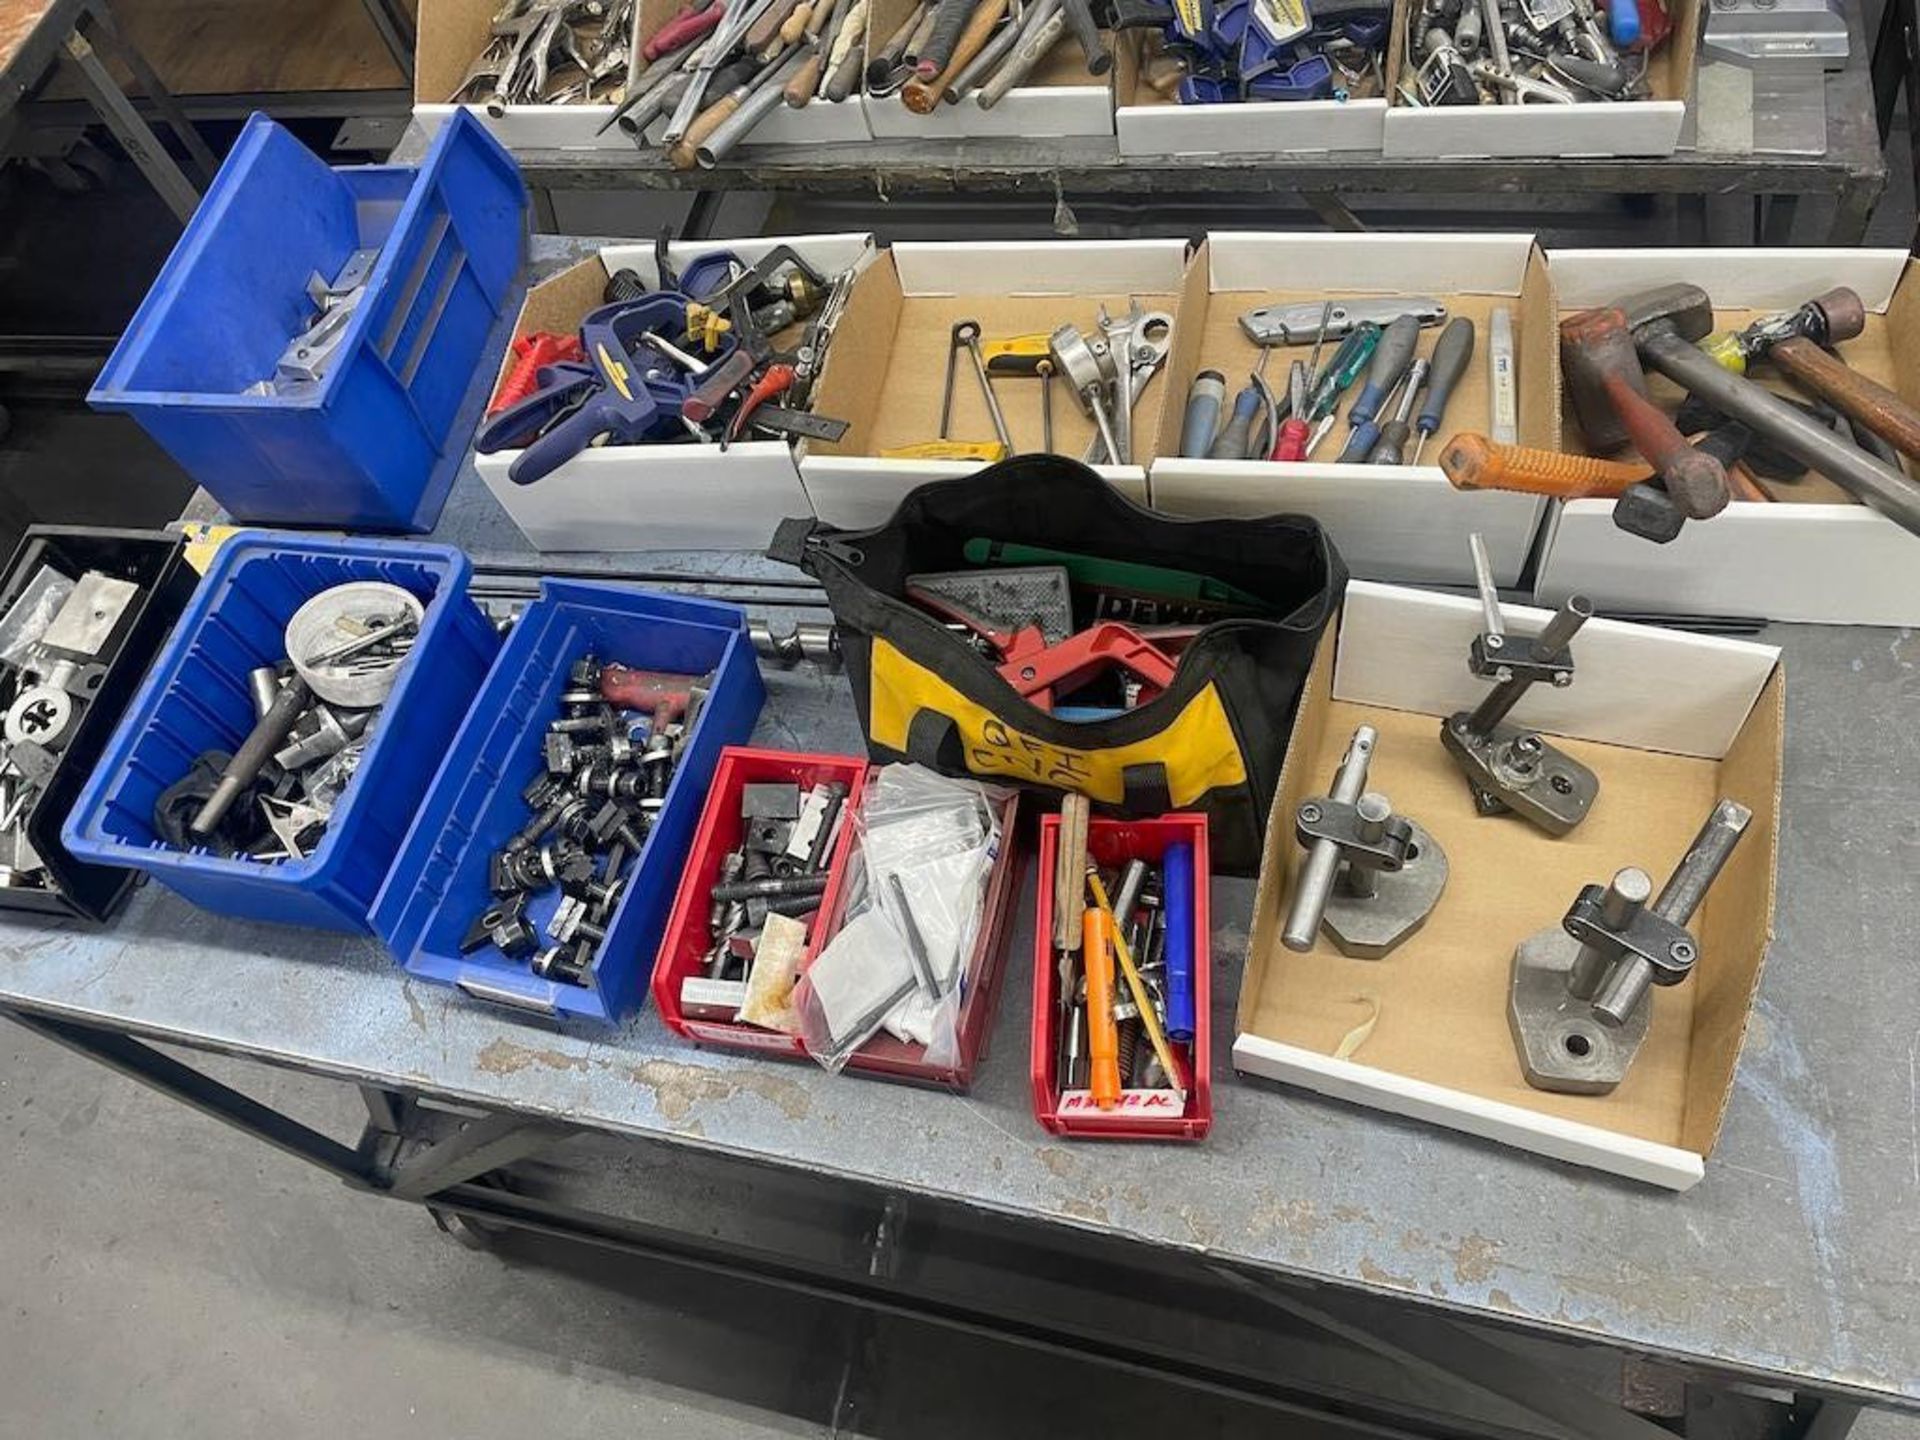 ASSORTED HAND TOOLS, PNEUMATIC, GLOVES, TAPE DISPENSERS, HEIGHT GAUGE, PLUNGER CANS, W 3 HD STEEL - Image 10 of 16